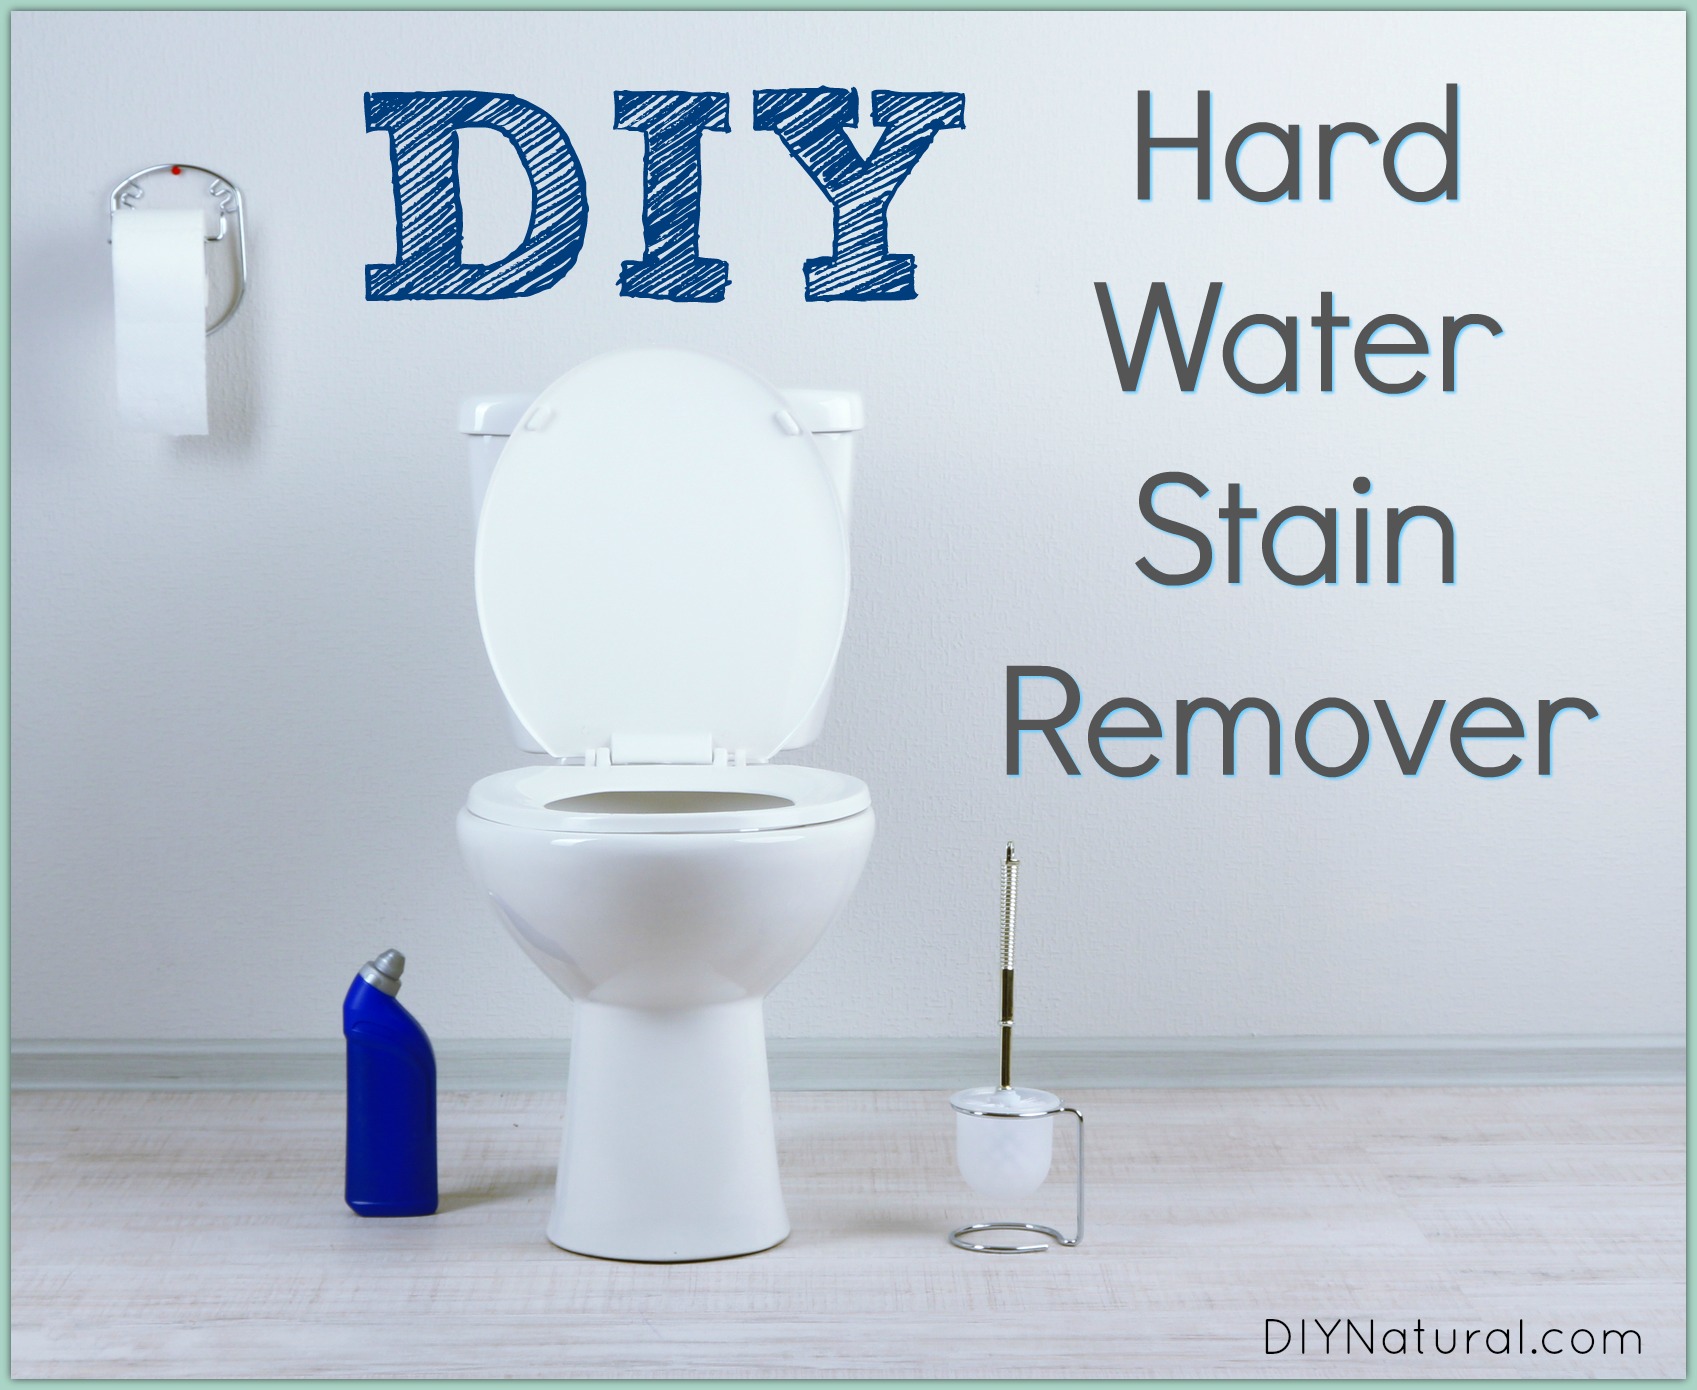 A Diy Hard Water Stain Remover Recipe, How To Remove Blue Water Stains From Bathtub